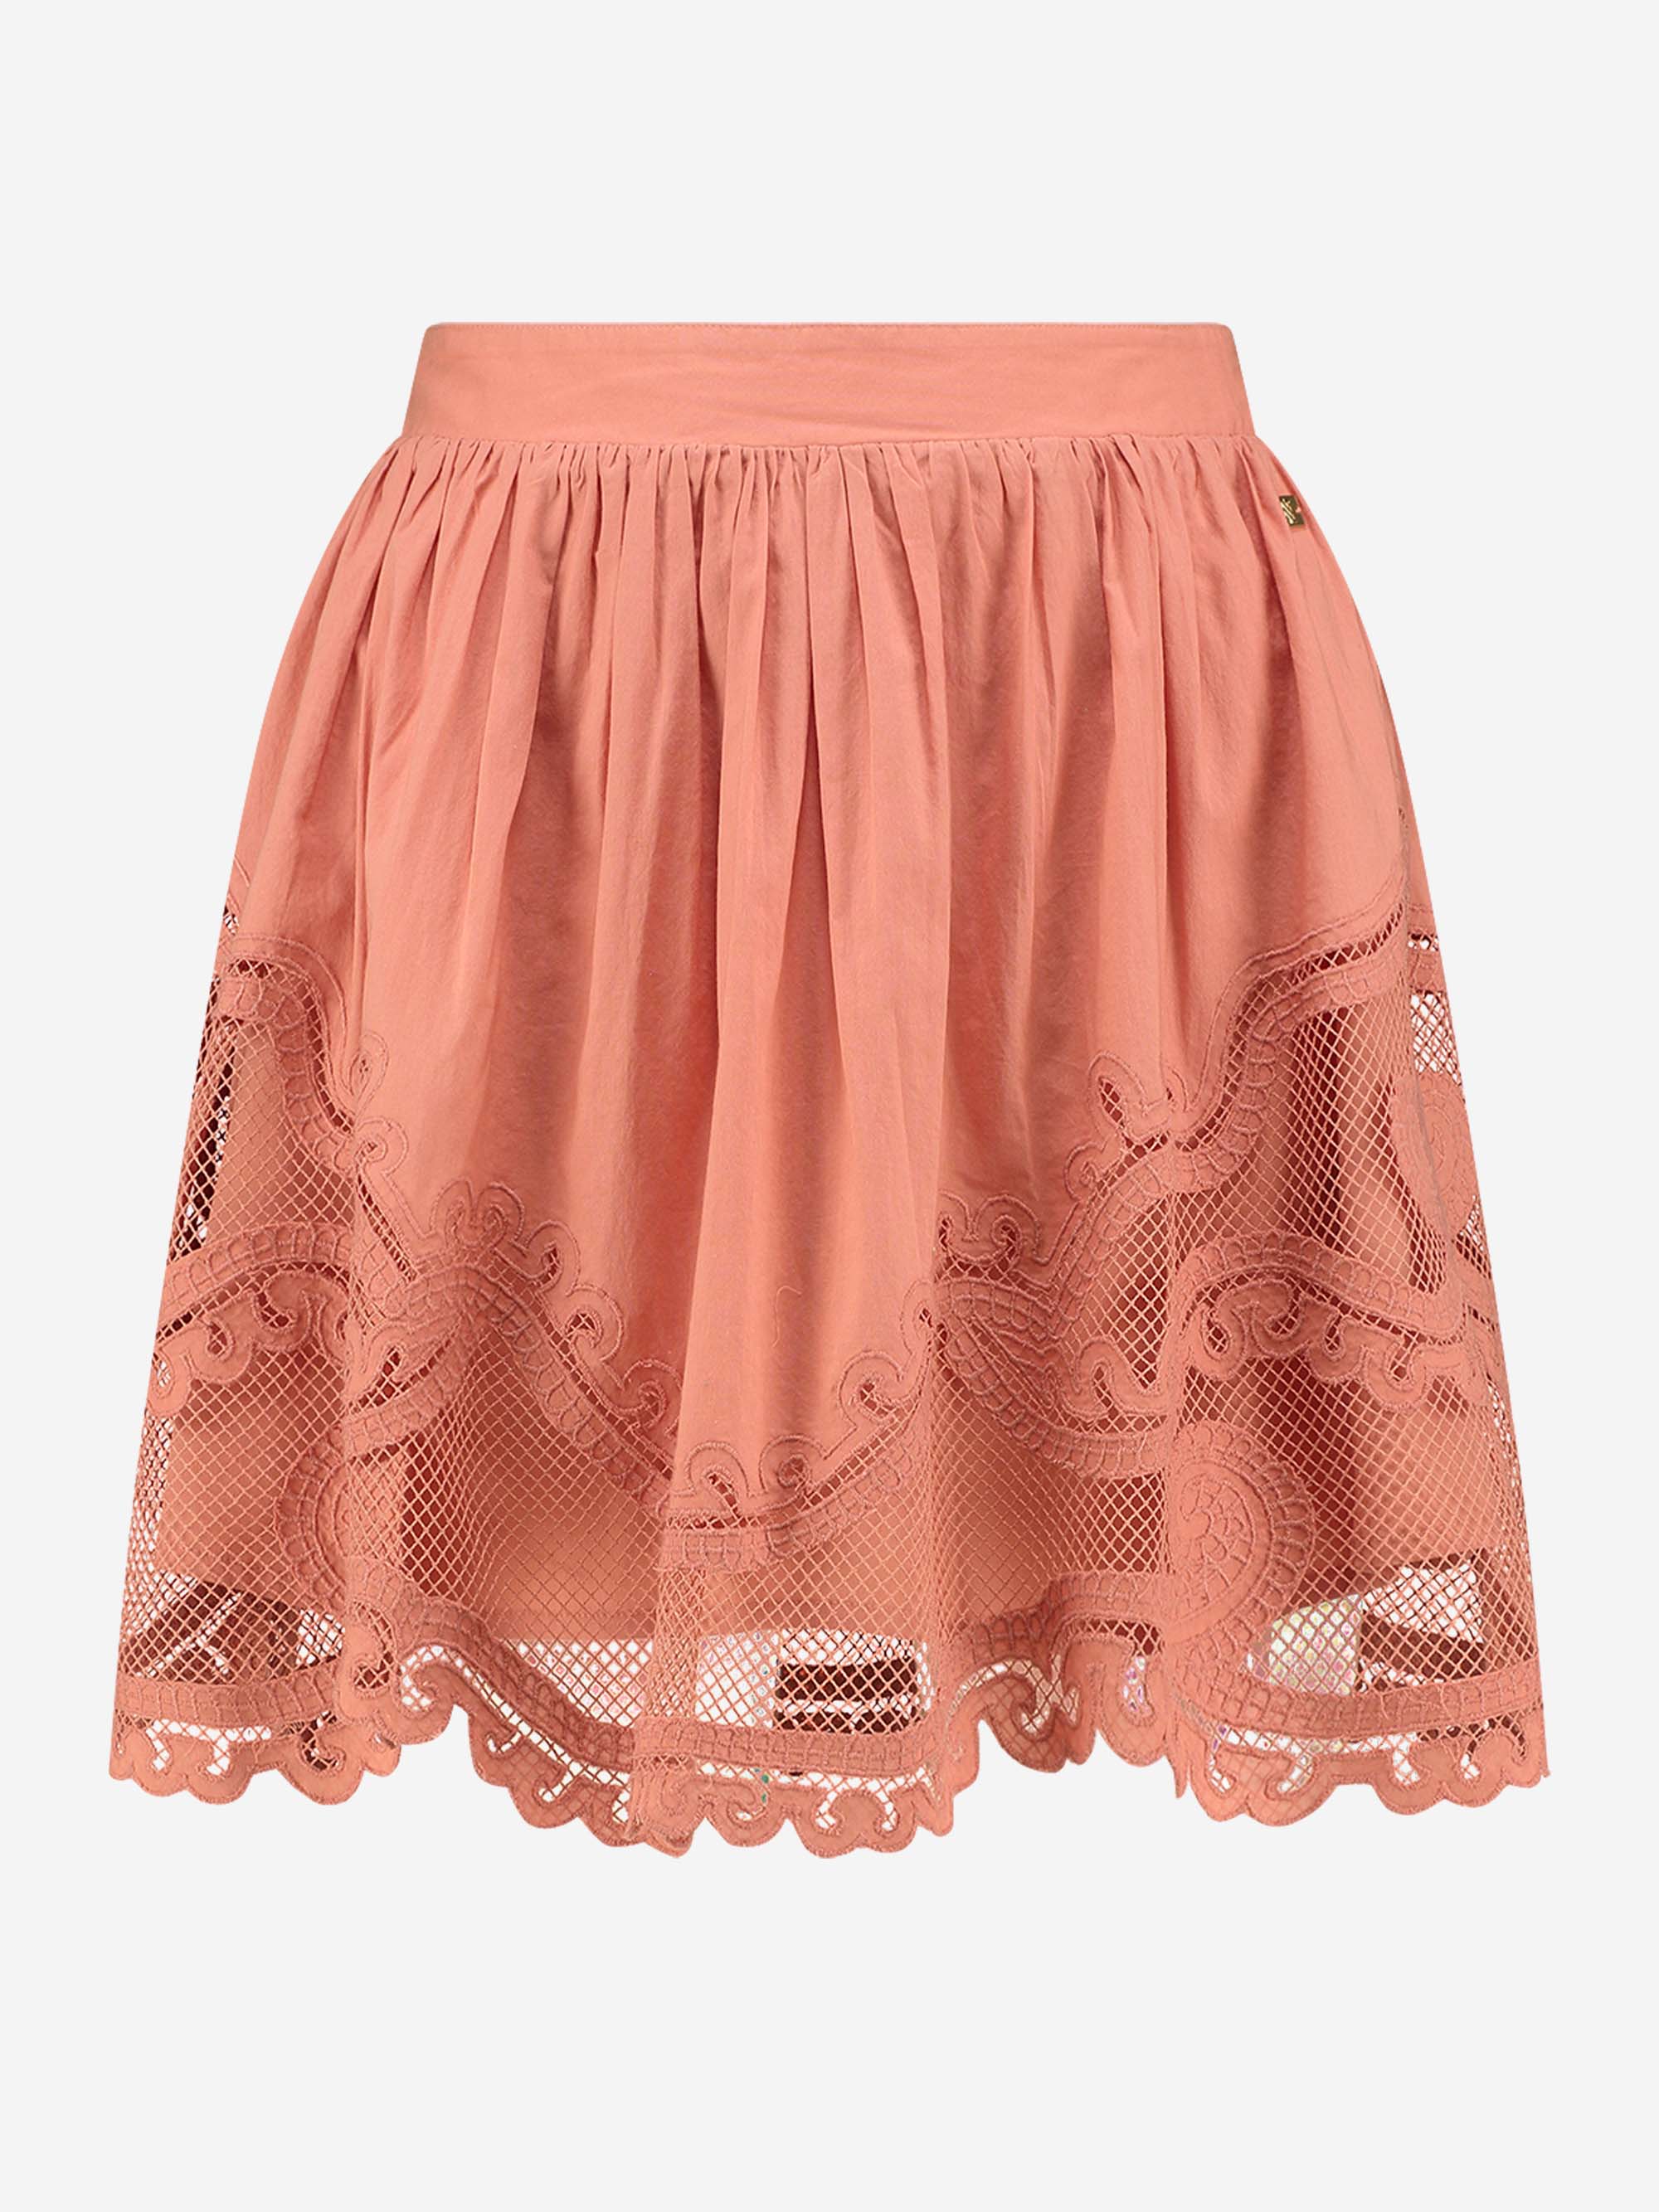 Laced skirt